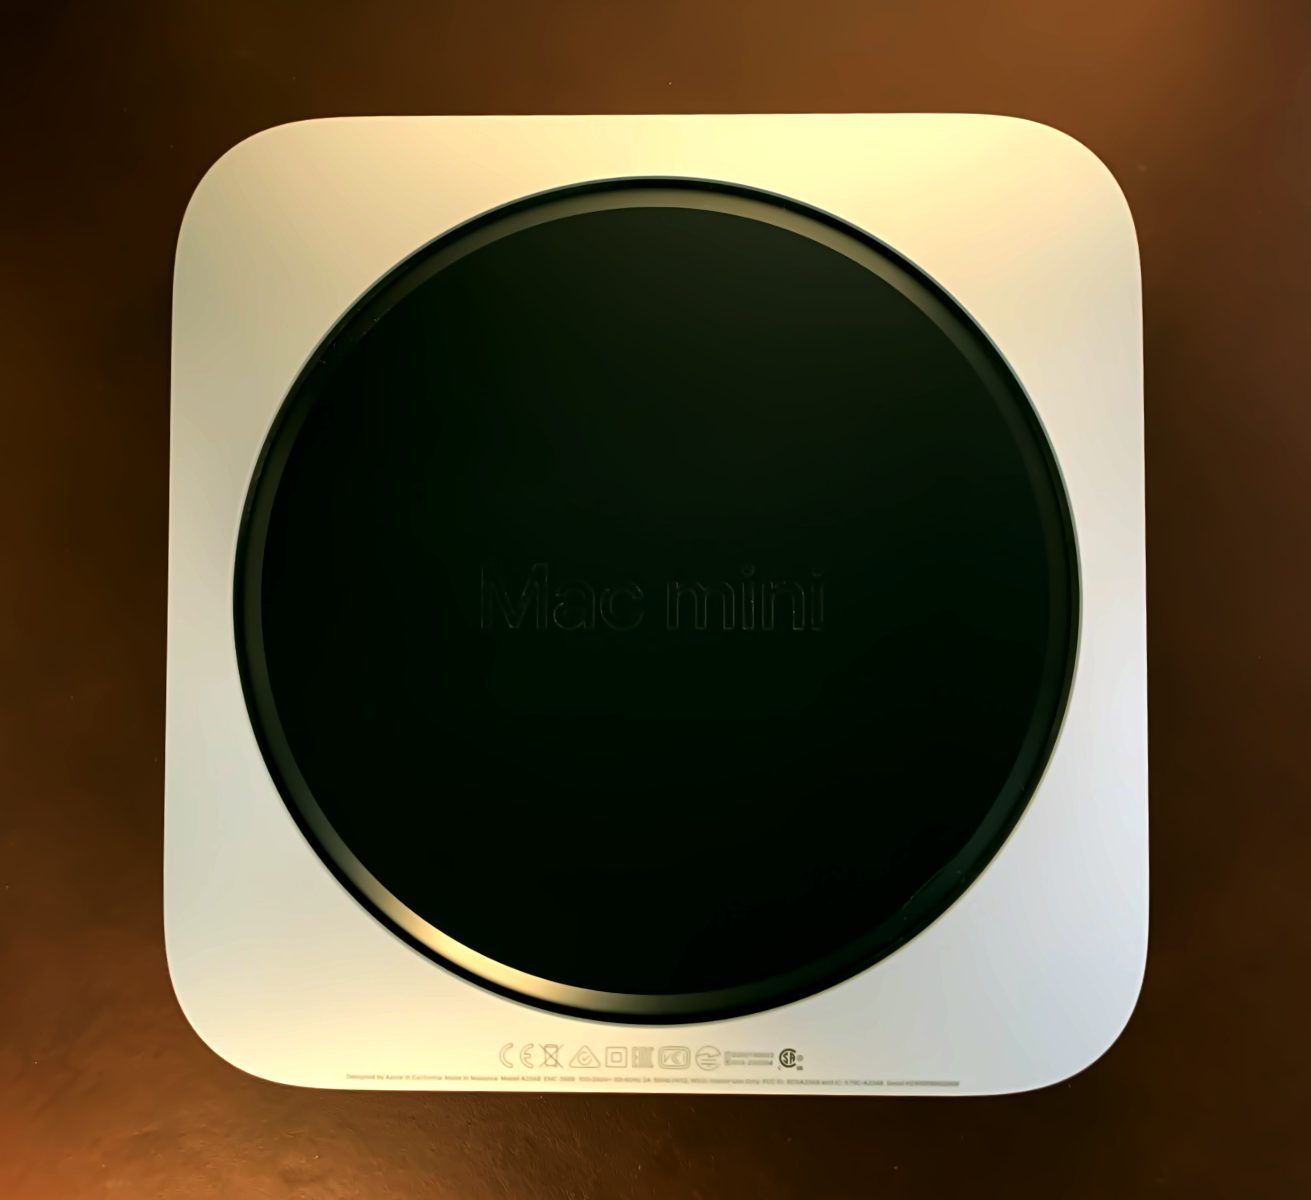 Mac Mini M1 Underside With Logo Visible